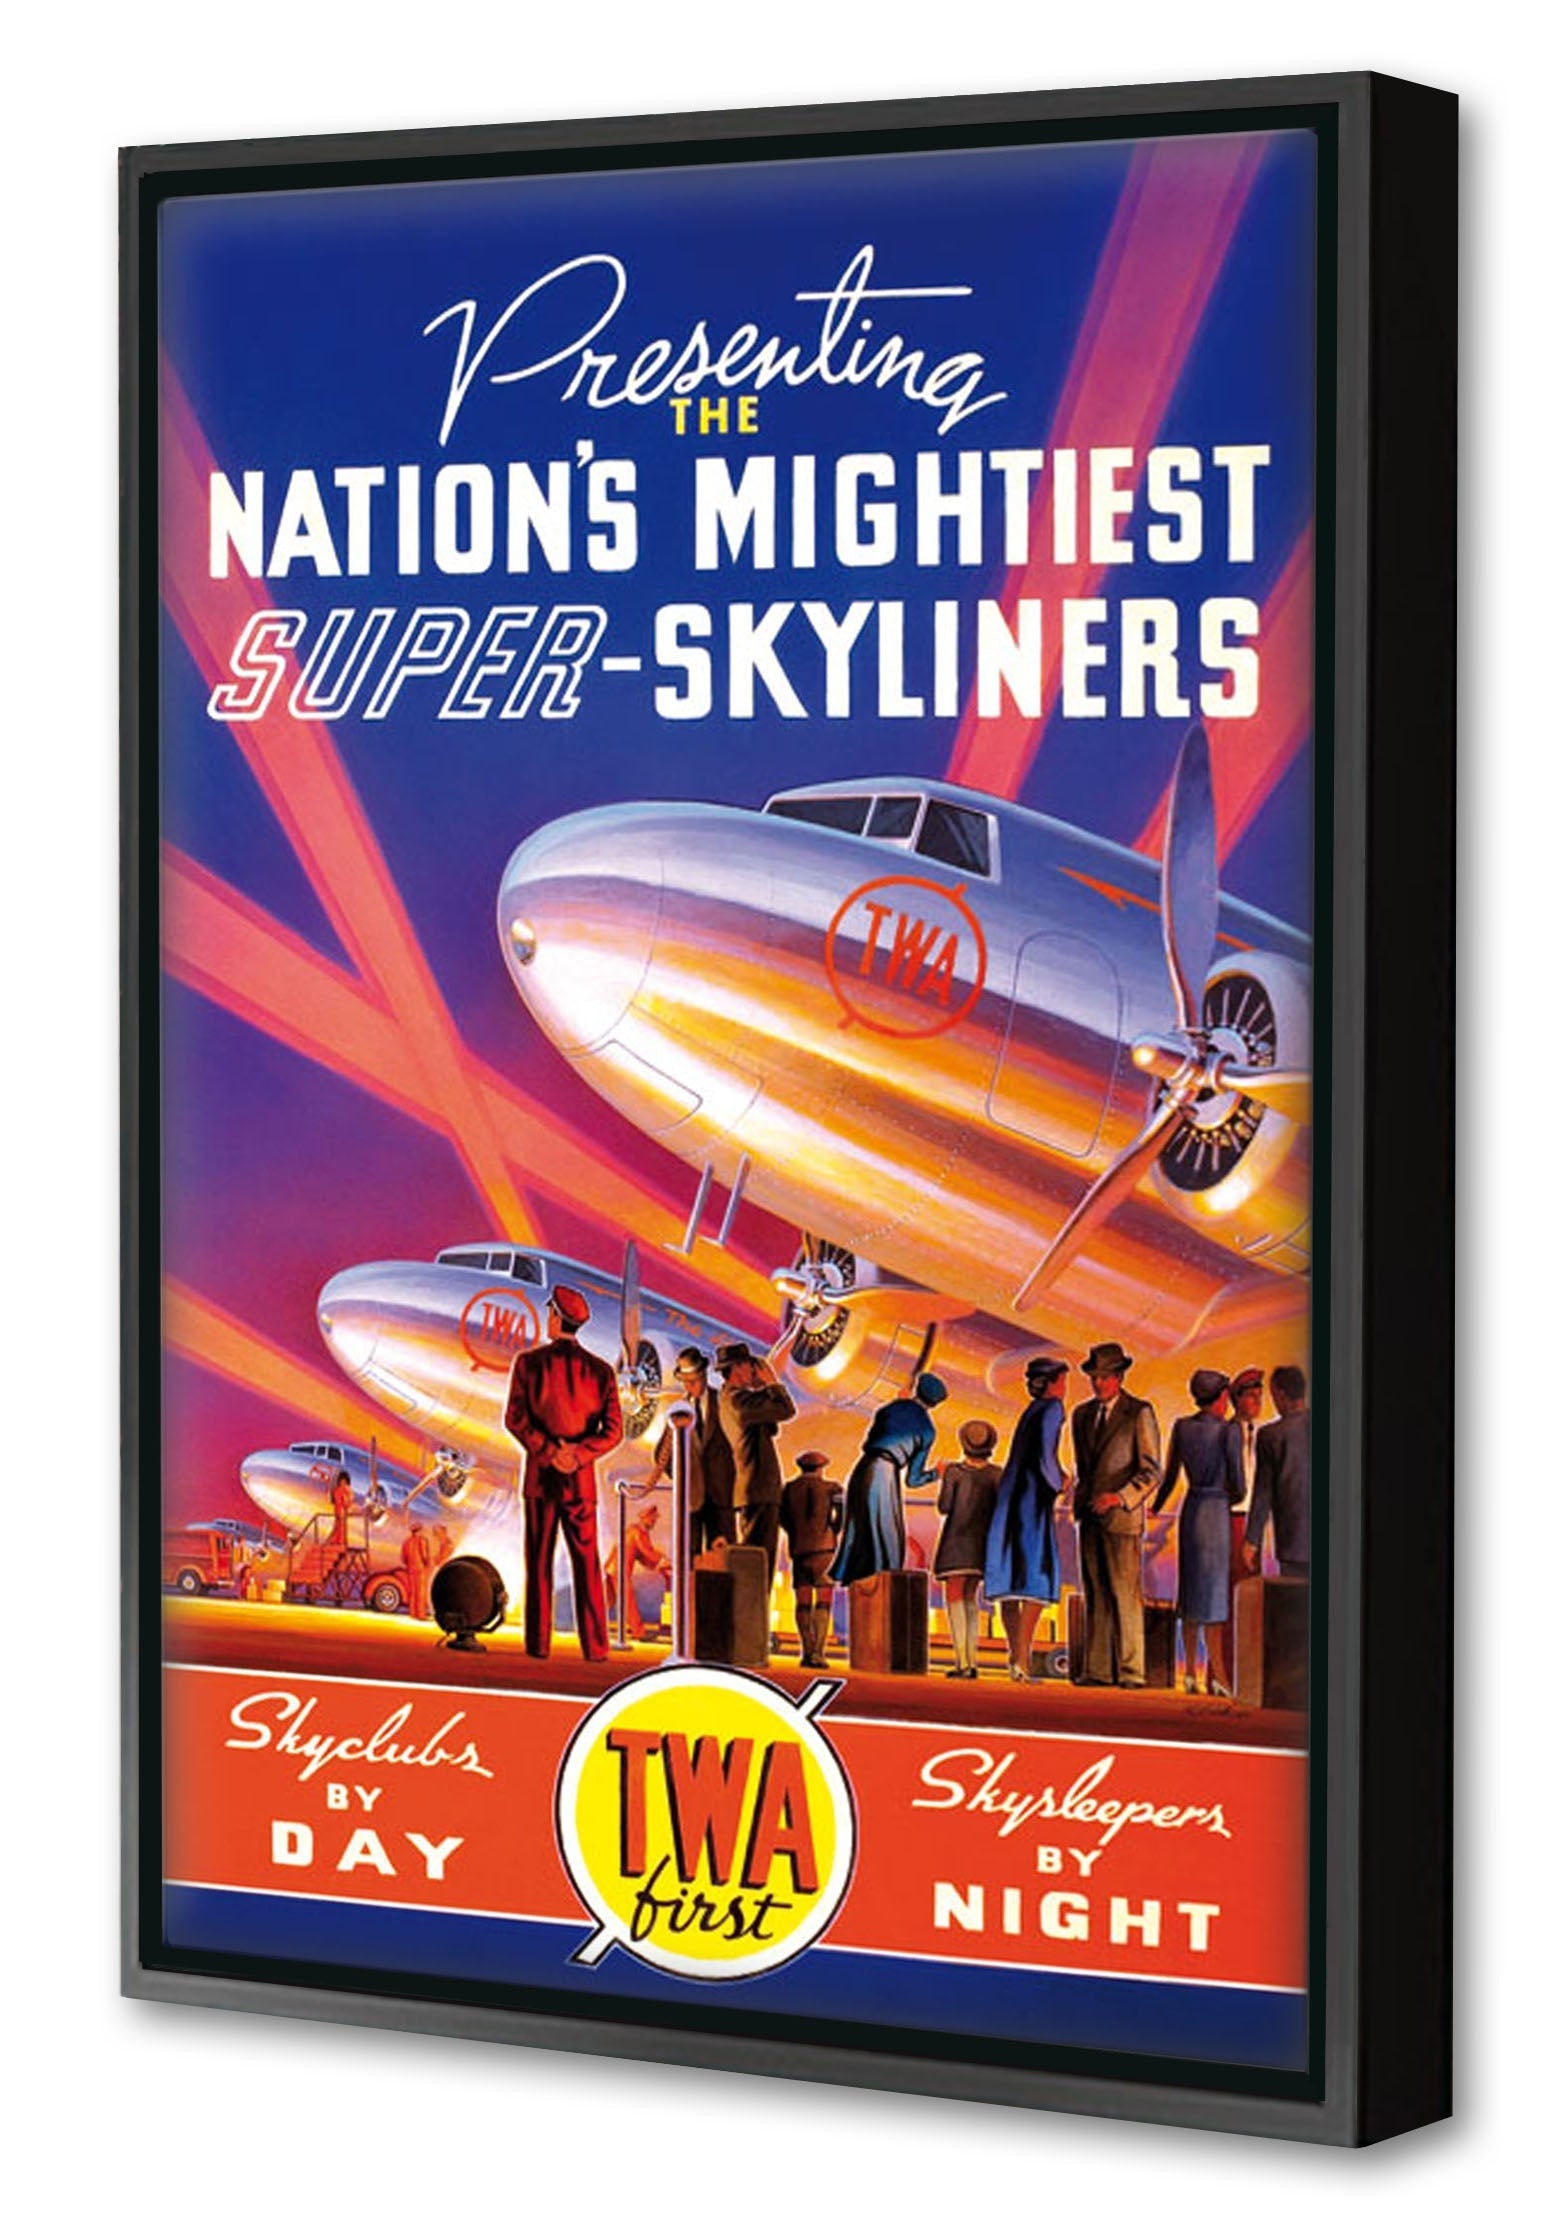 TWA Skyliners-airlines, print-Canvas Print with Box Frame-40 x 60 cm-BLUE SHAKER